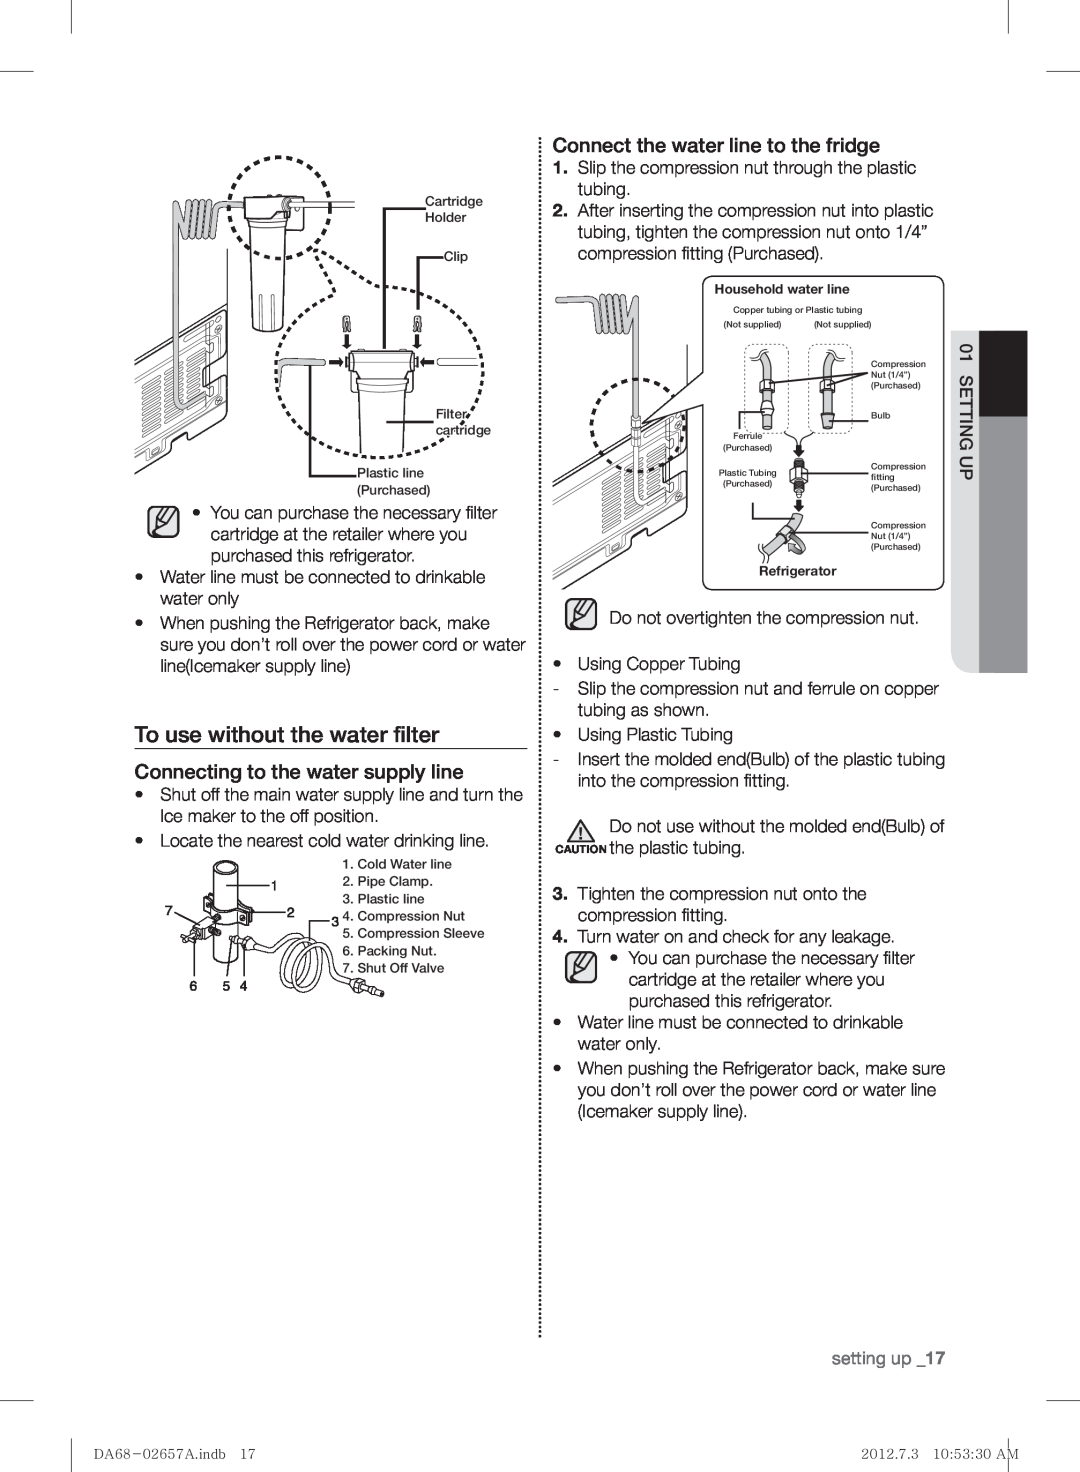 Samsung RF221NCTABC user manual To use without the water ﬁlter, Connecting to the water supply line, setting up 